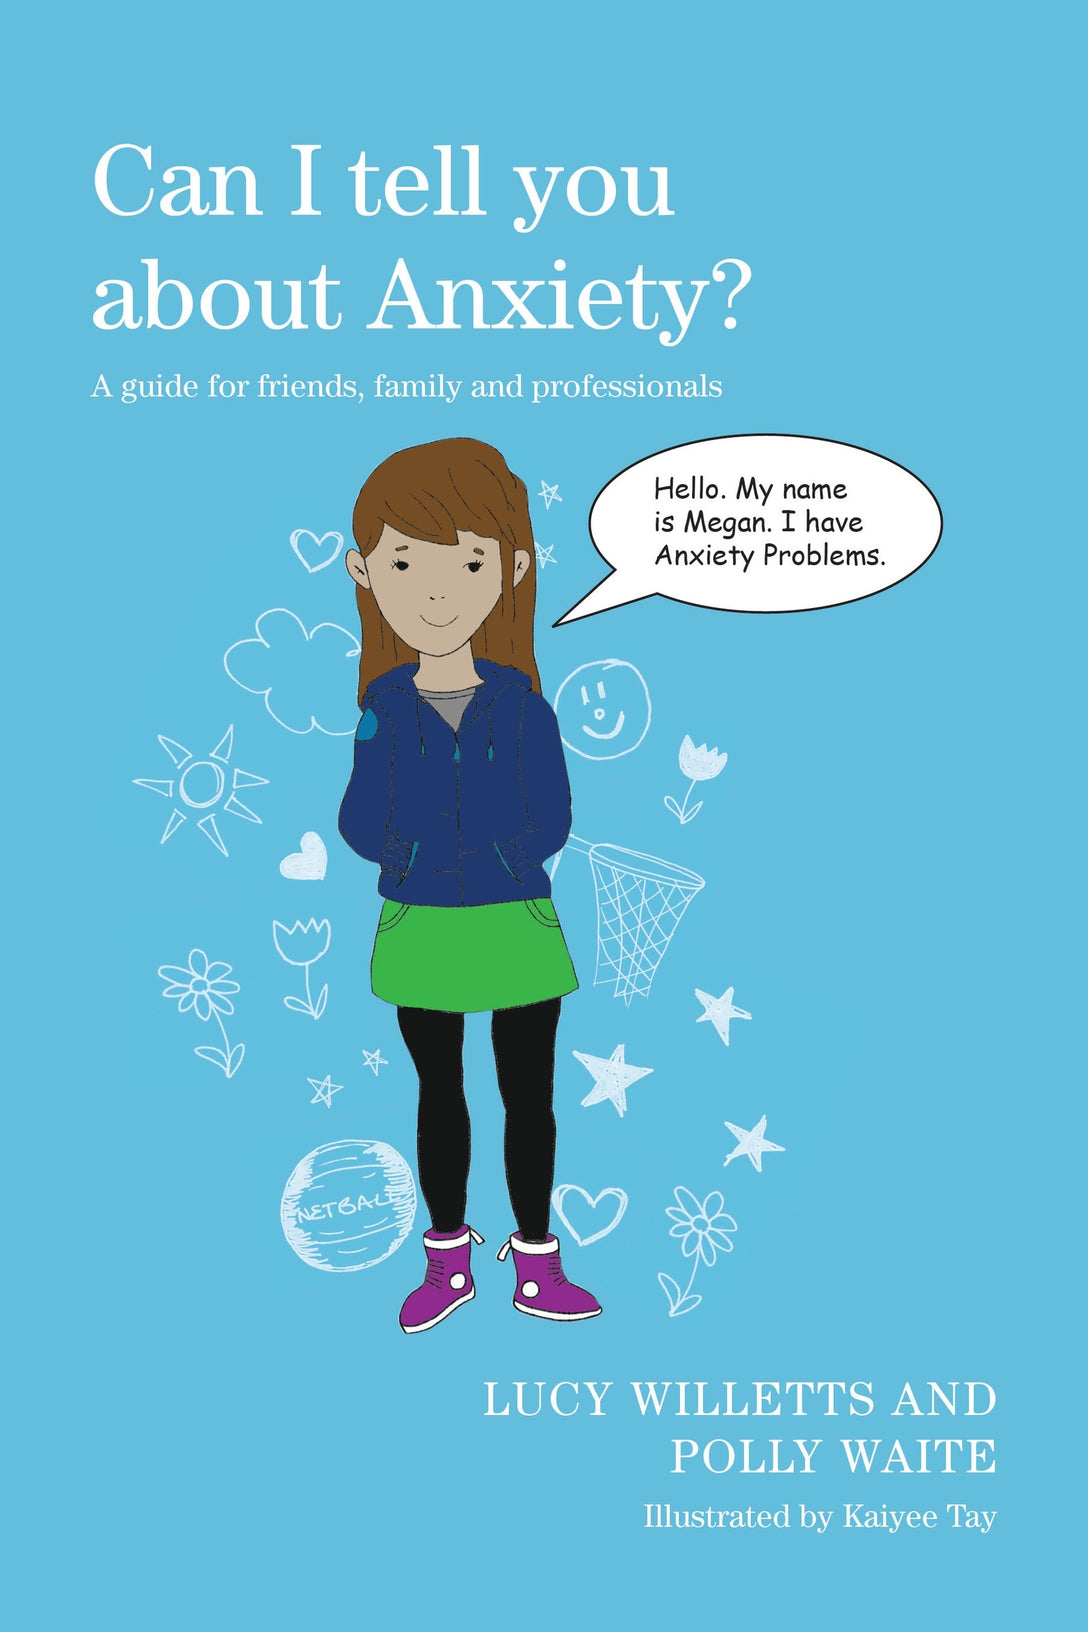 Can I tell you about Anxiety? by Kaiyee Tay, Polly Waite, Lucy Willetts